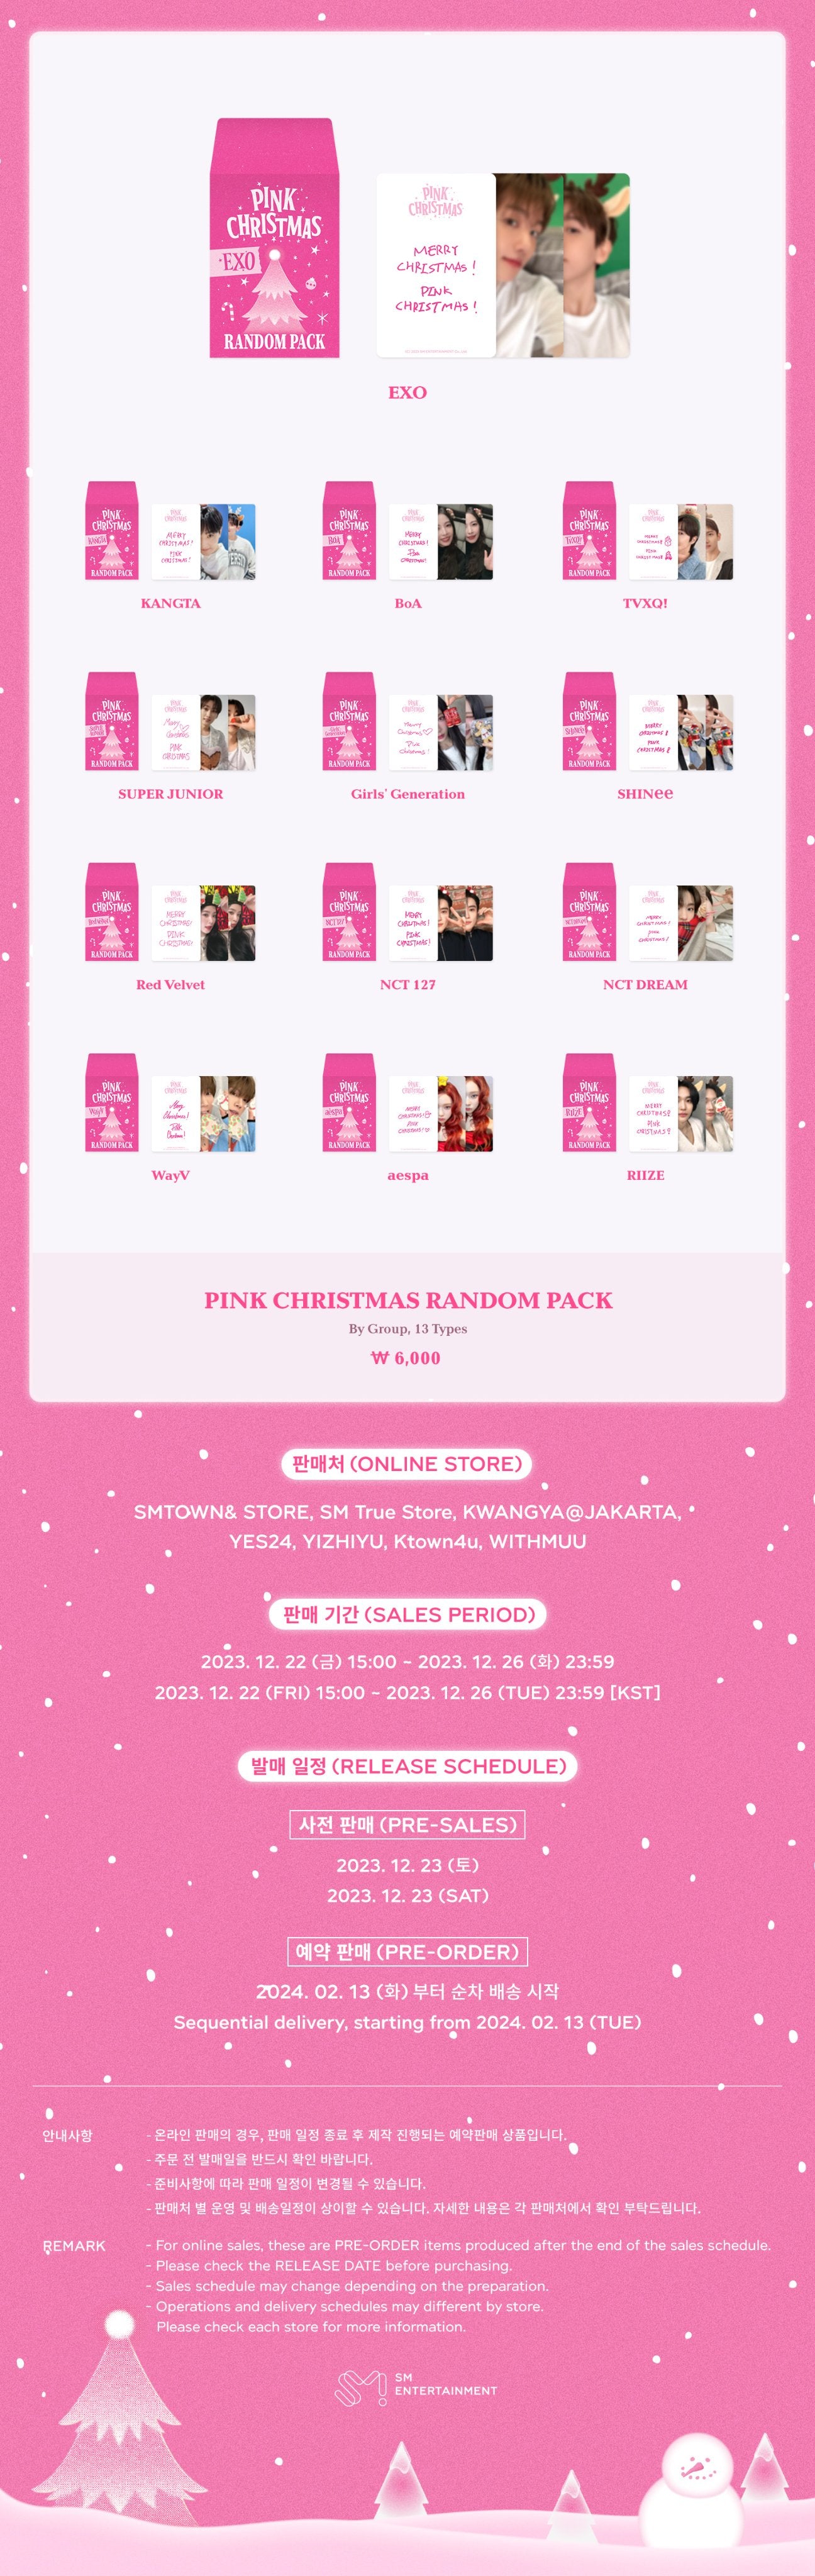 BoA Official on X: PINK CHRISTMAS RANDOM PACK @ KWANGYA from BoA OFFICIAL  MD LINE UP SALES NOTICE ▷ Sales Day 2022. 12. 23 (FRI) 18:00 ~ 2022. 12. 30  (FRI) 23:59 [KST]  / X